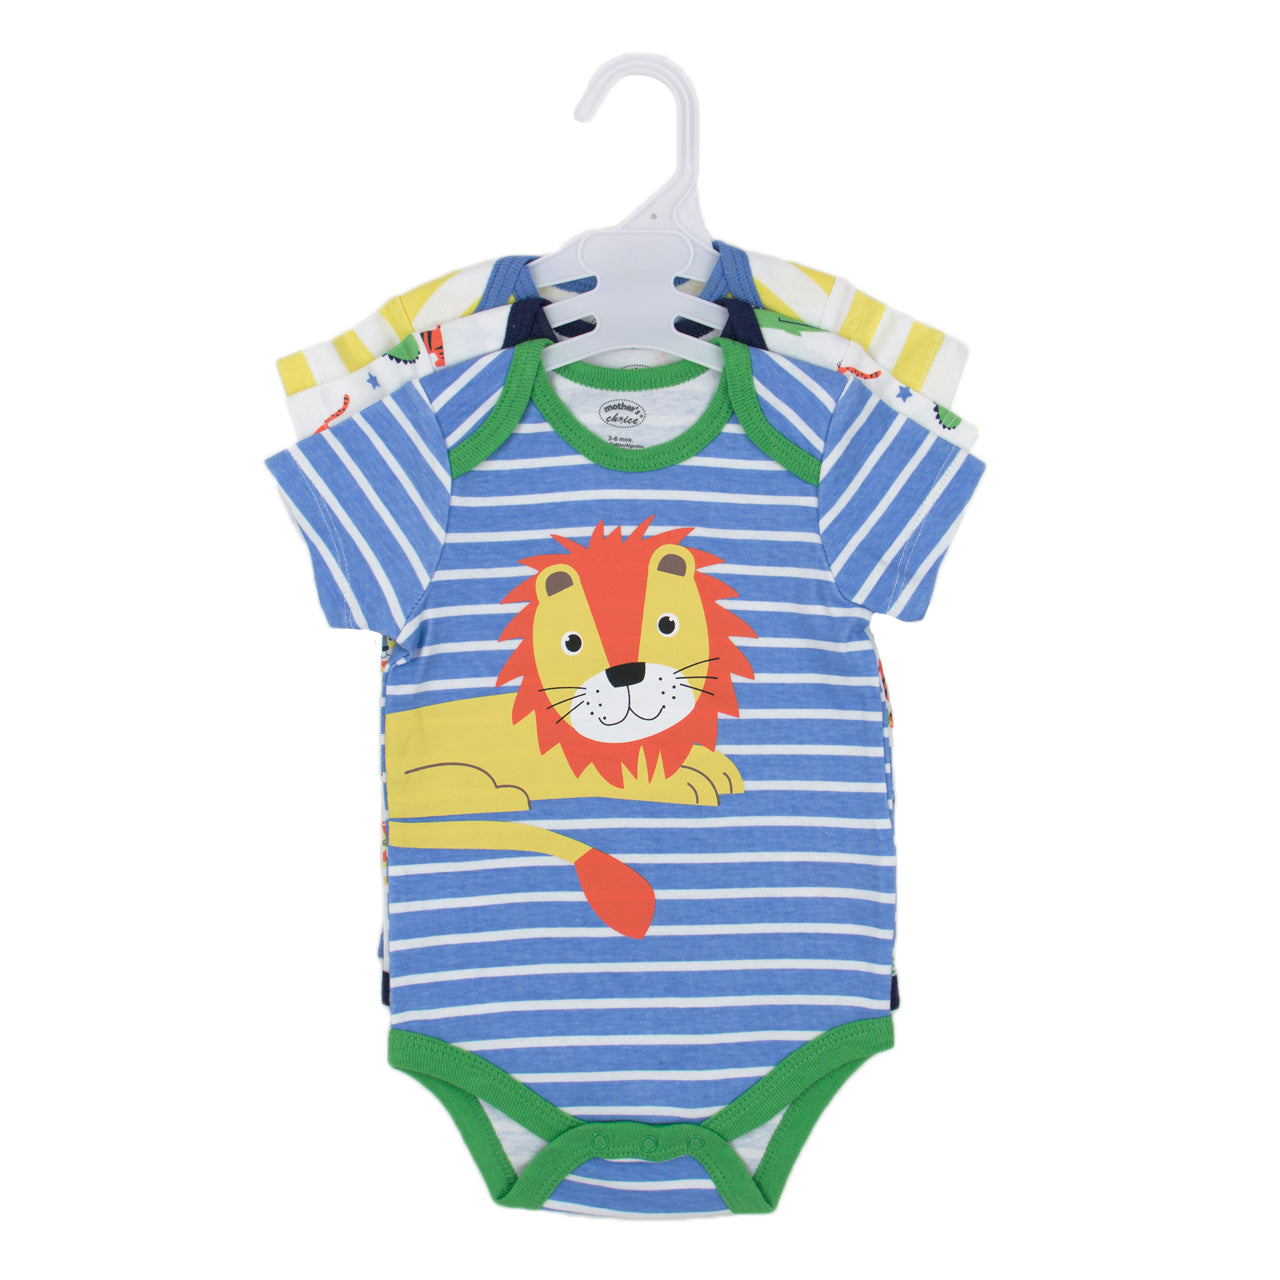 Mother's Choice 3 Pack Short Sleeves Onesie (Lion/IT2353)